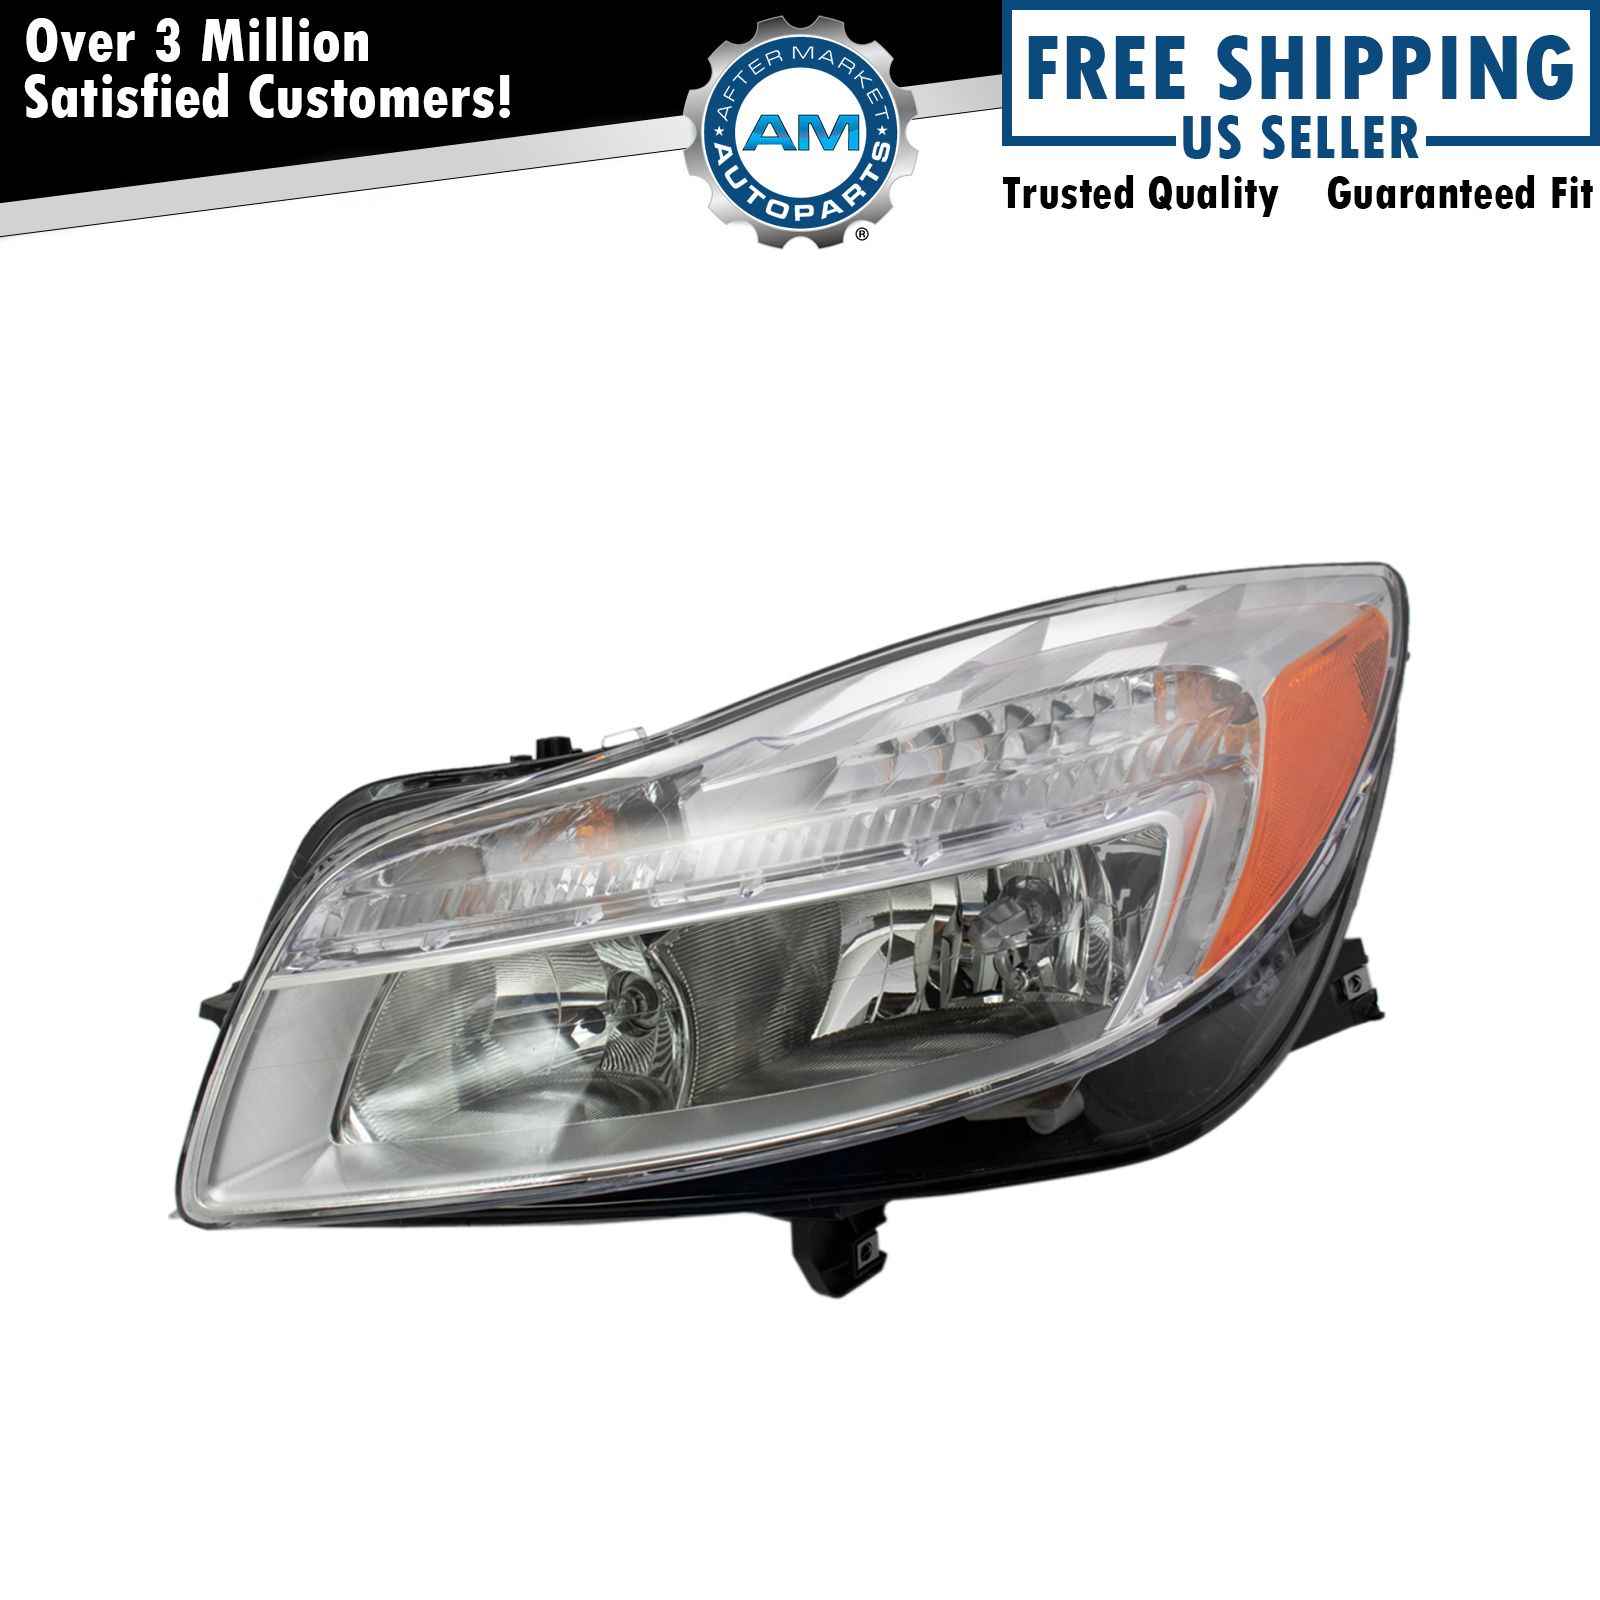 Halogen Headlight Lamp Assembly Driver Side LH for Buick Regal New